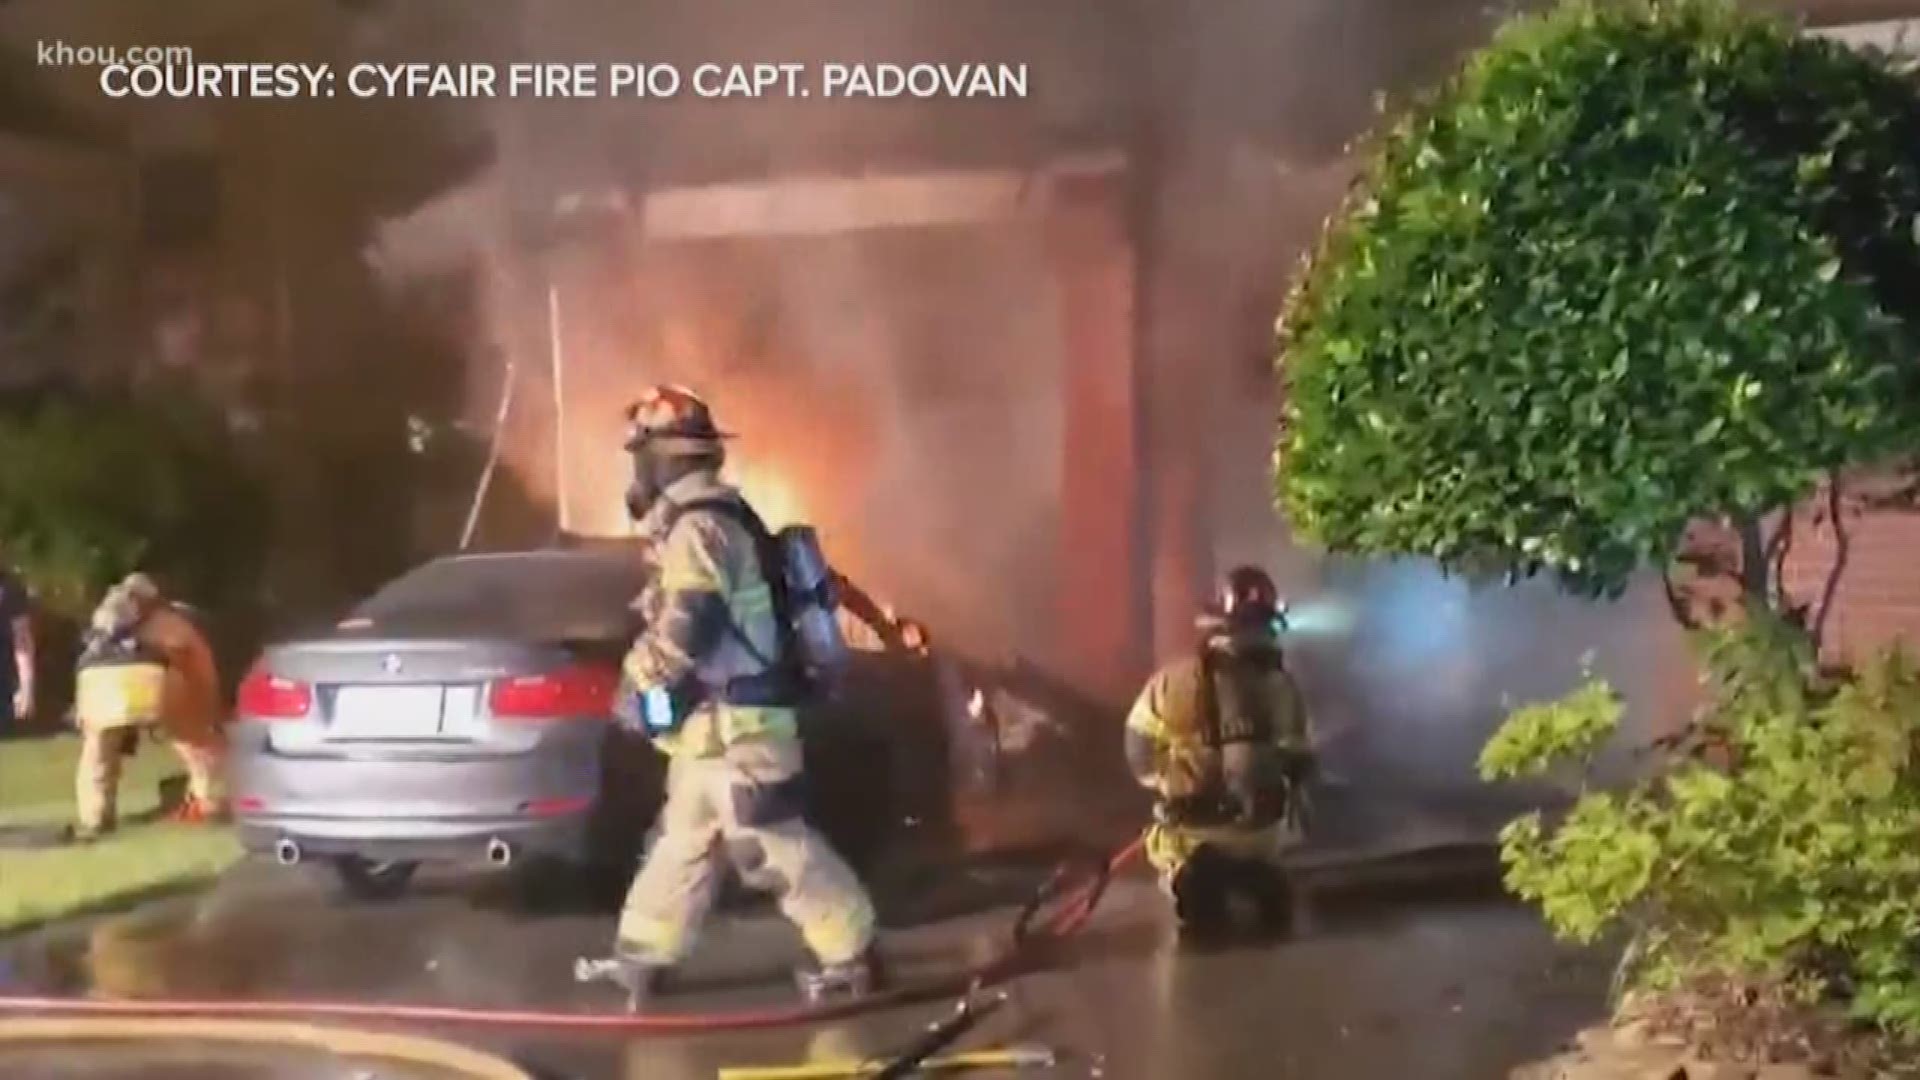 KHOU 11's Michelle Choi reports on a fire in the Cypress area. It happened late June 3, 2019.